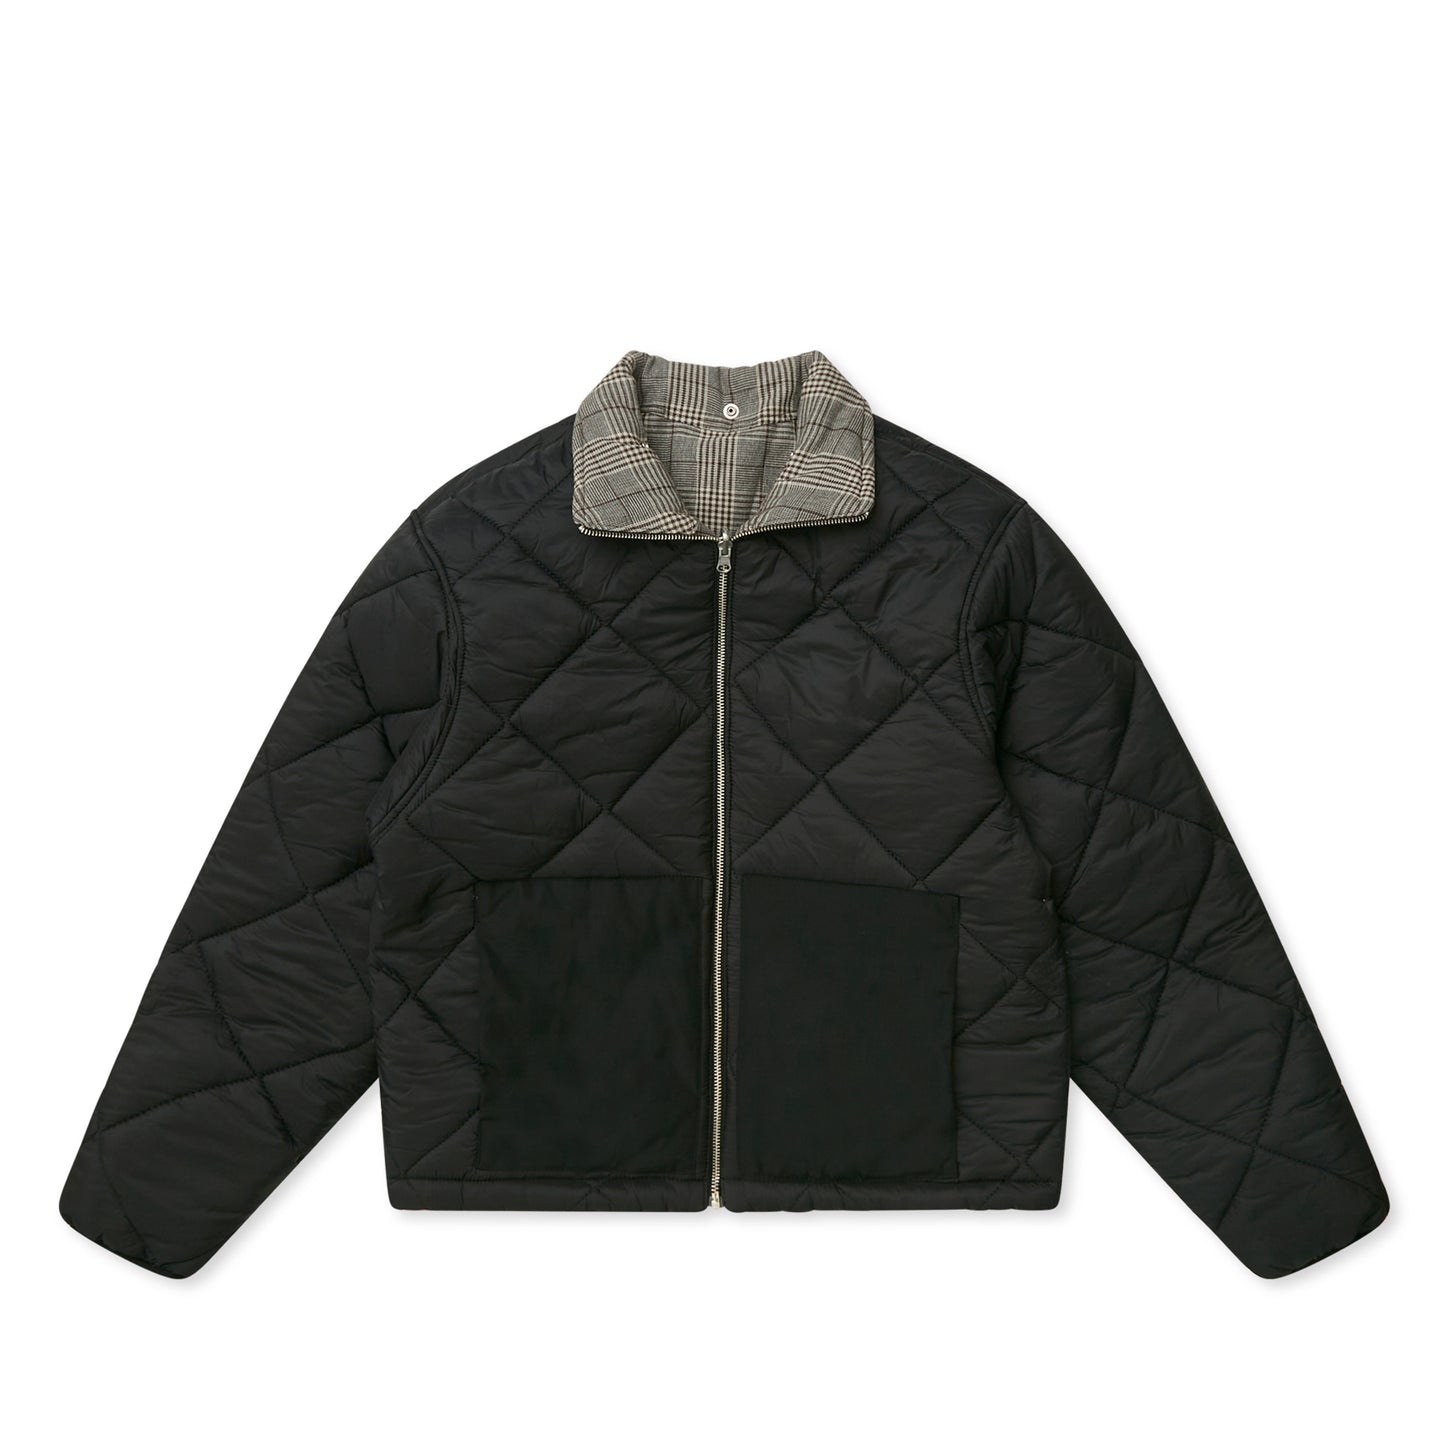 PUFFER JACKET CLASS "DOUBLE FACE" PLAID